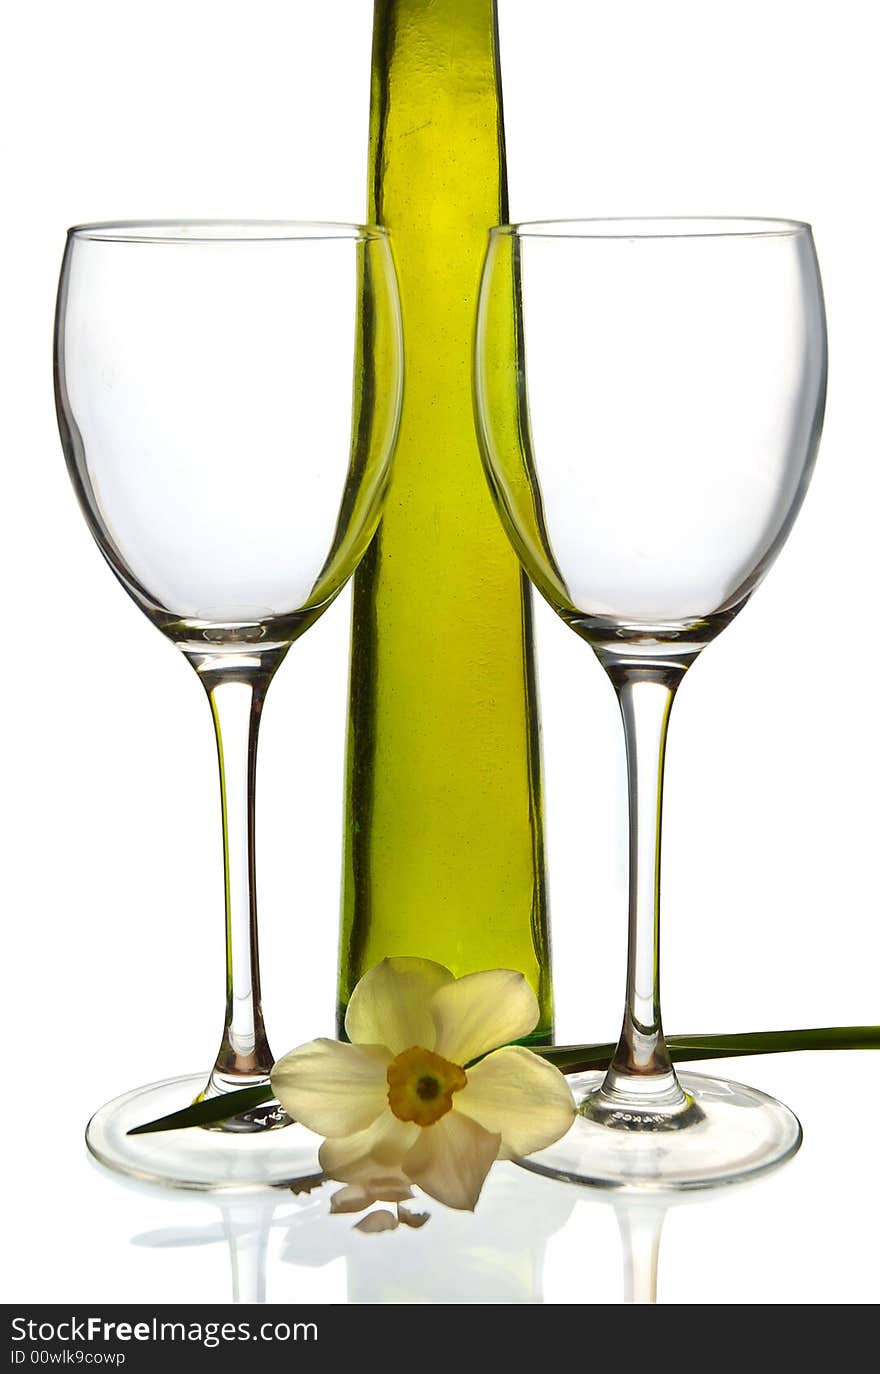 Wine bottle and two empty glasses with daffodil against a white background. Wine bottle and two empty glasses with daffodil against a white background